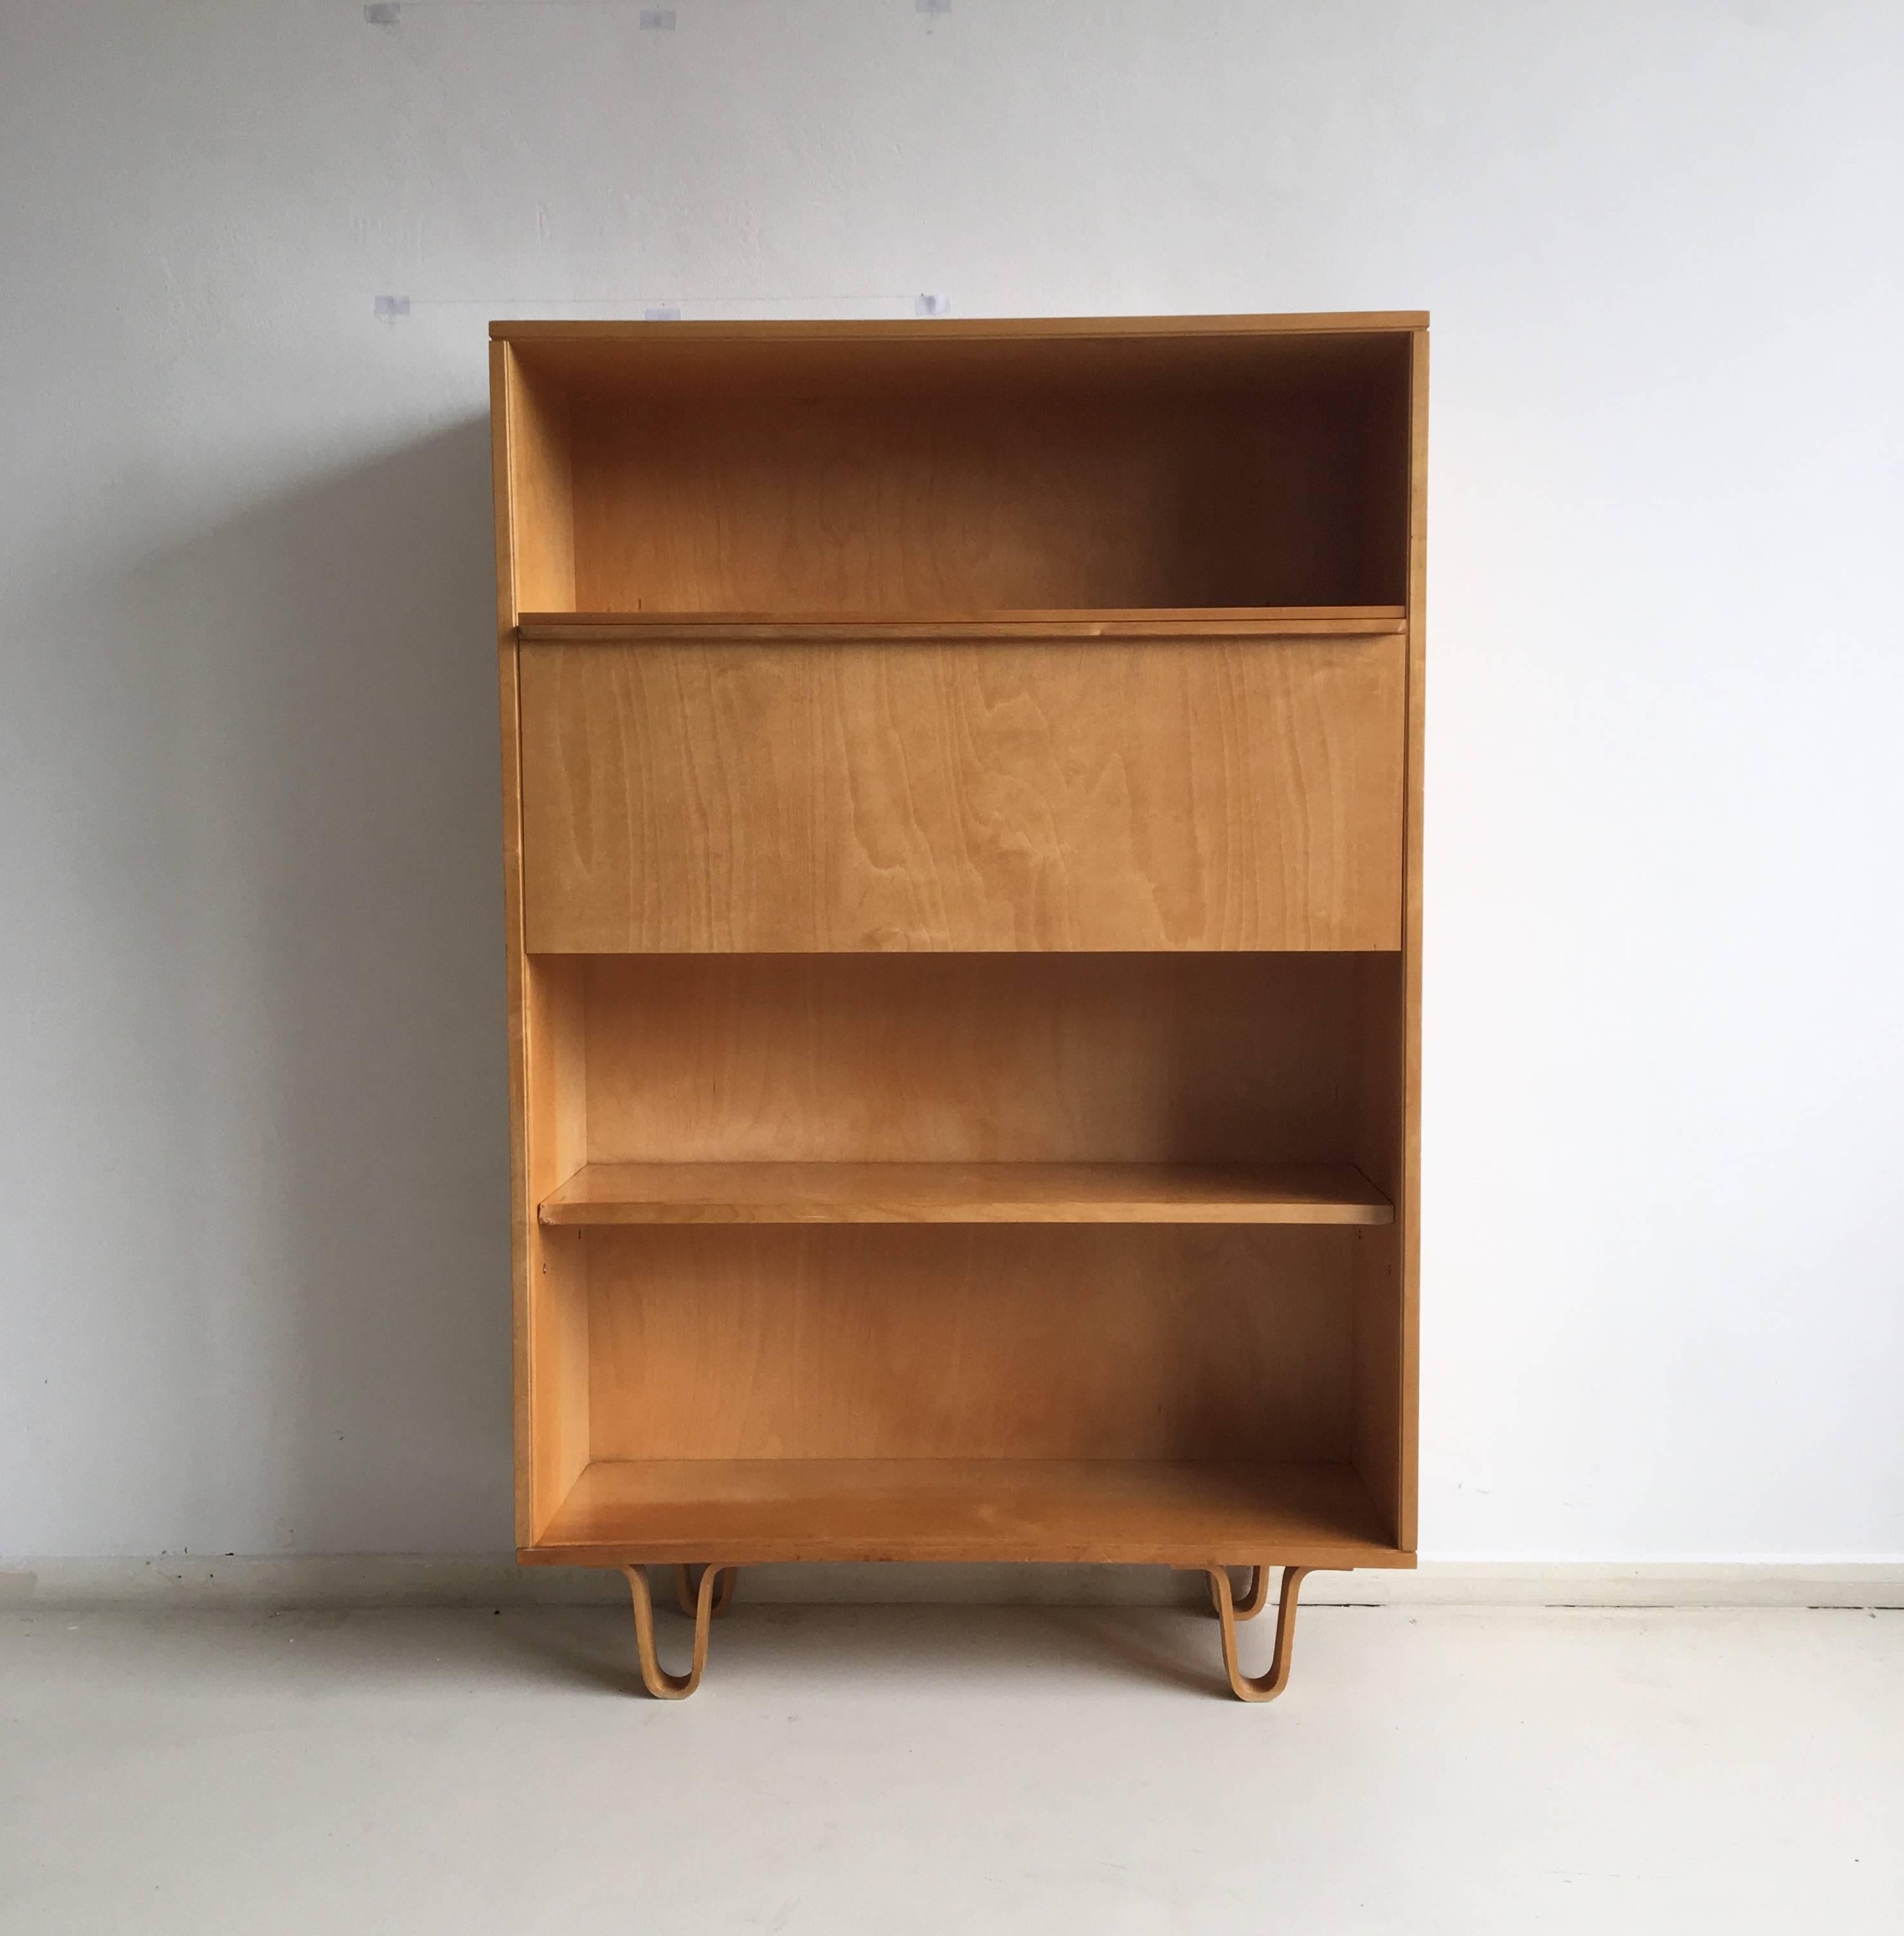 This wonderfull desk or secretaire, model, BB04, was designed by Cees Braakman for Pastoe in the 1950s. It features a drop down desktop and curved plywood feet which are characteristic for this series.

It remains in a very good vintage condition,